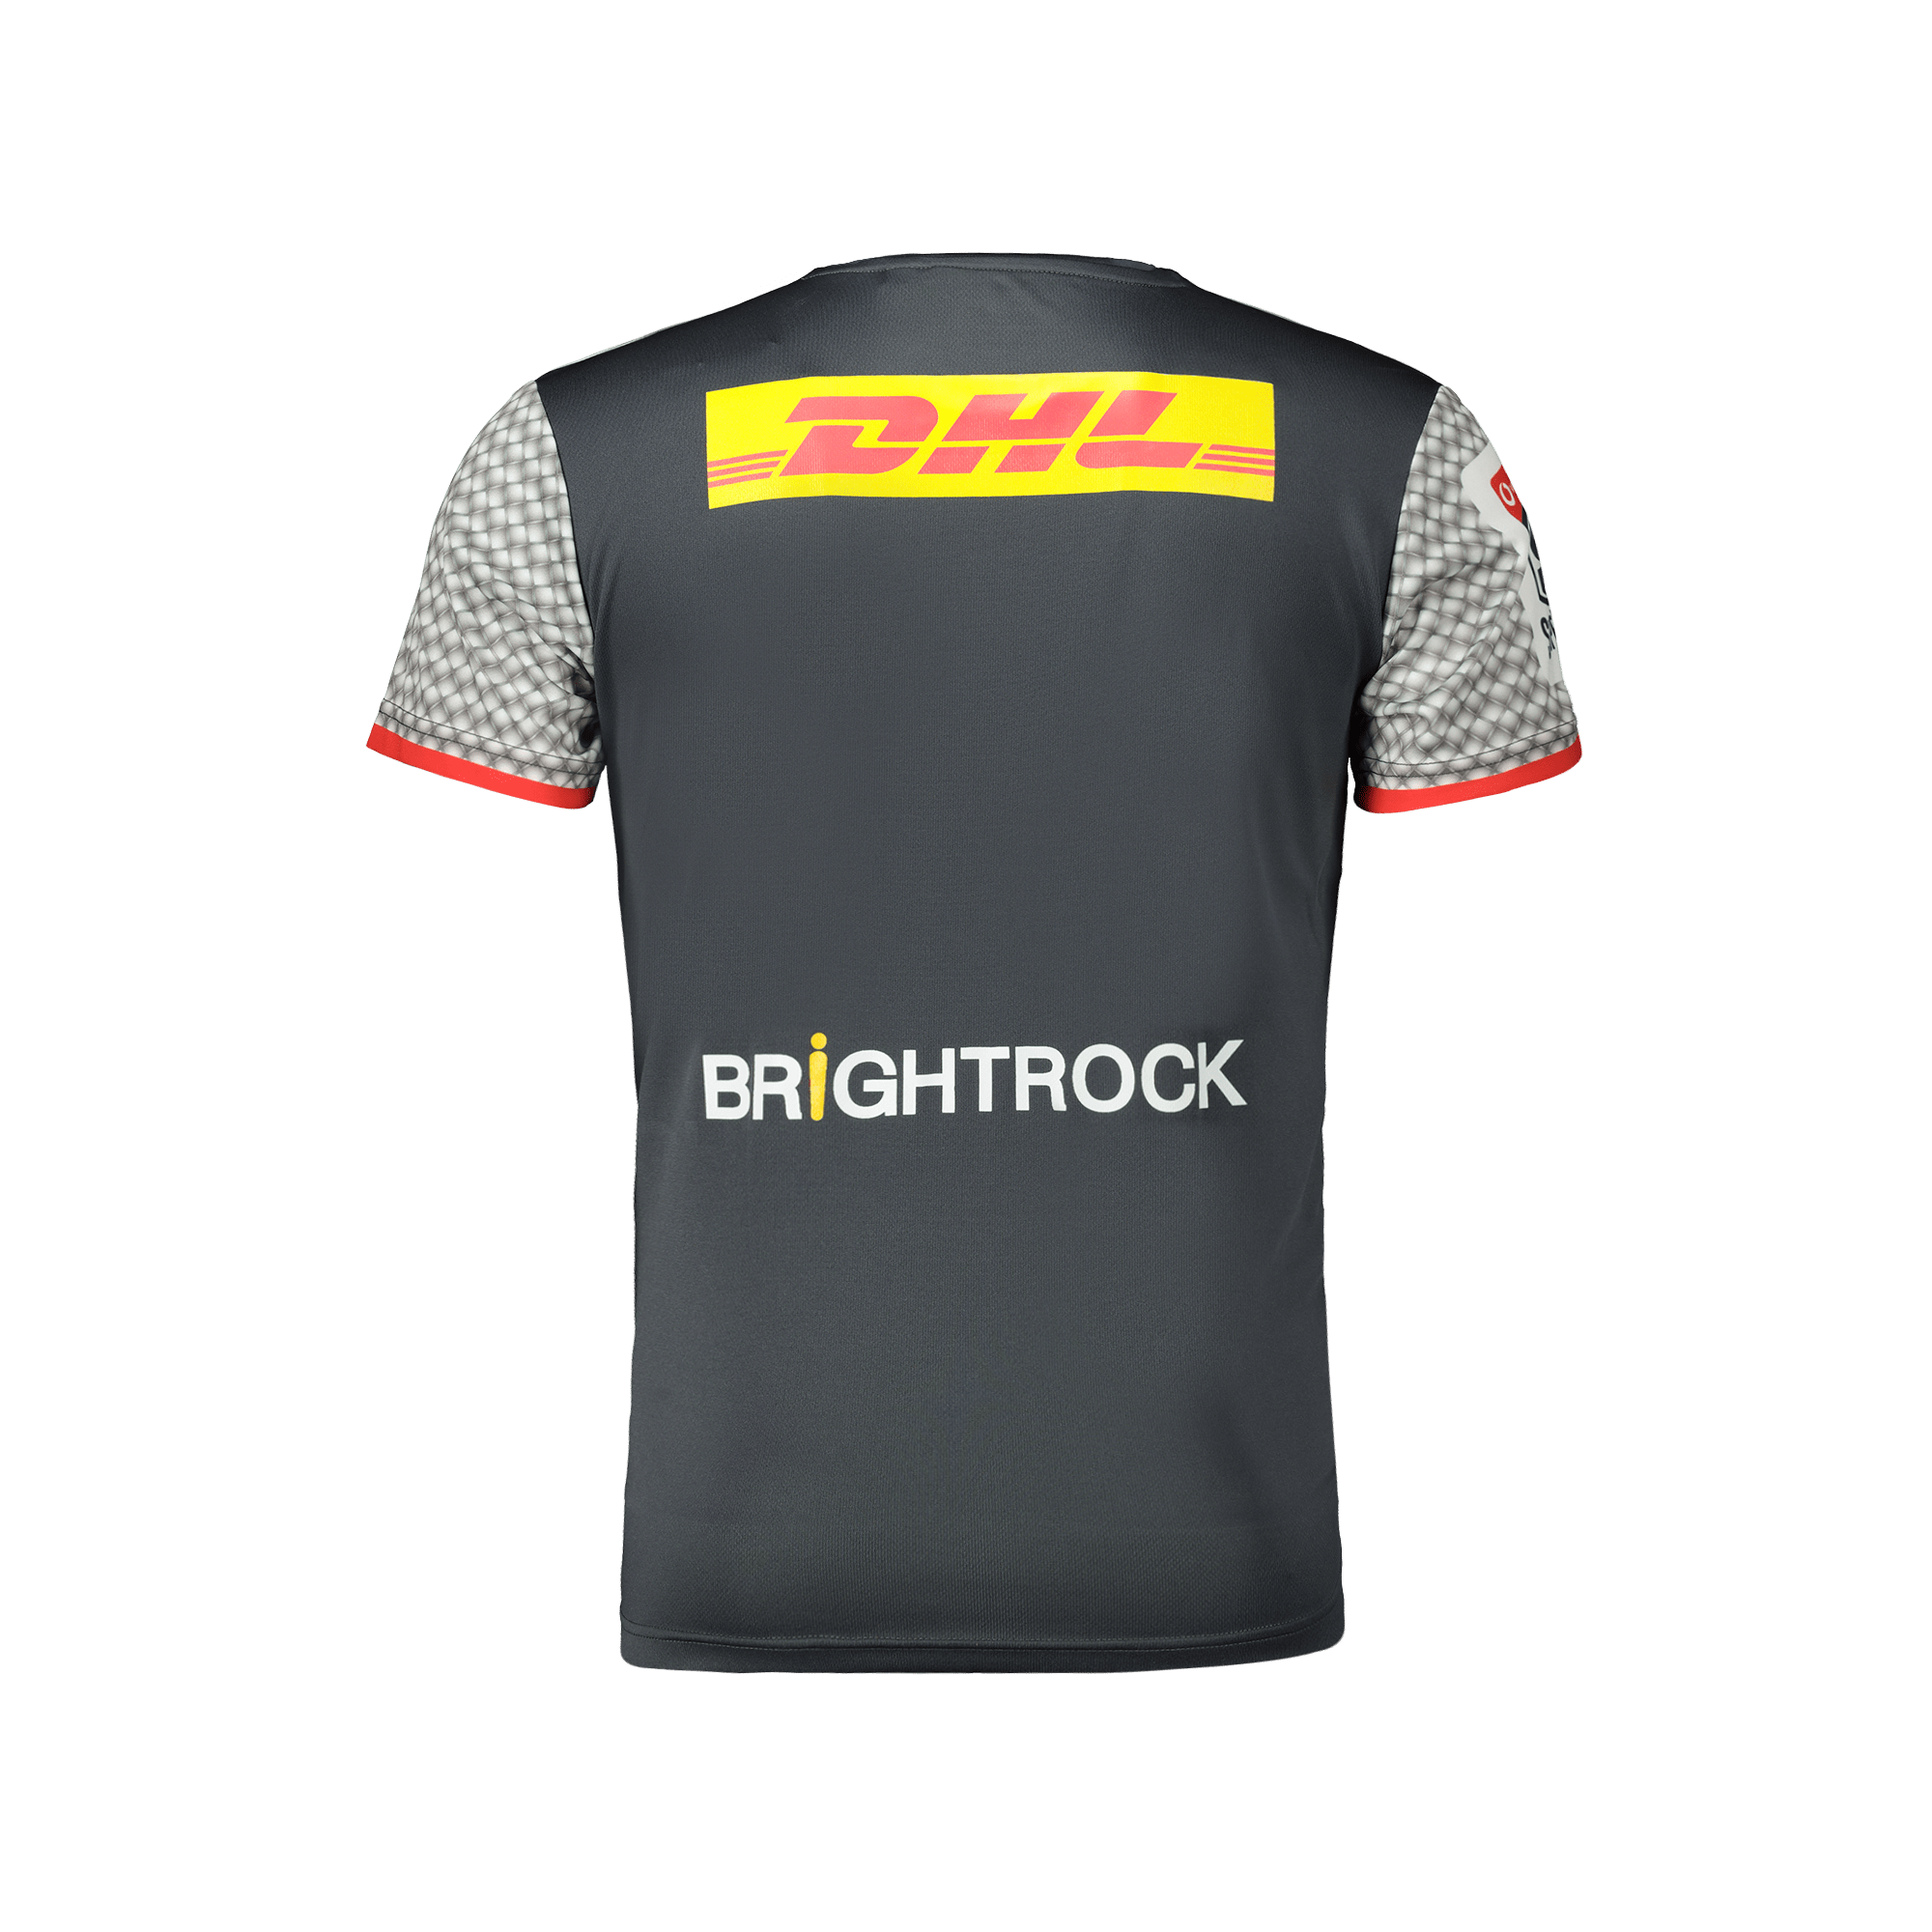 stormers new jersey 2020